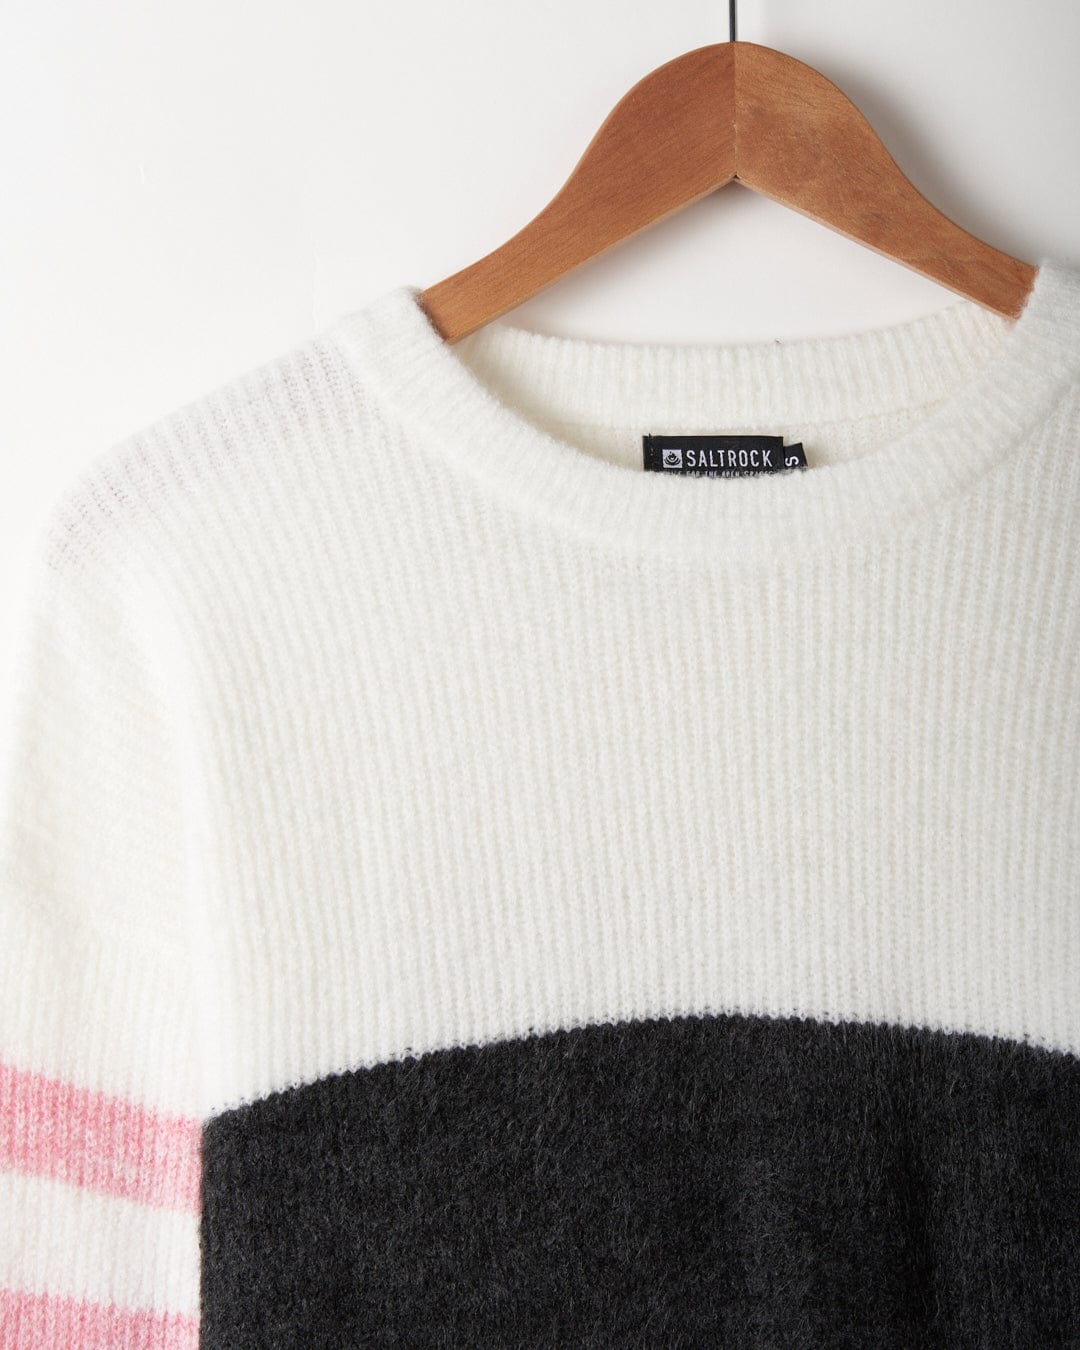 A soft touch sweater with pink and white stripes from Saltrock's Darcy womens knitwear collection.